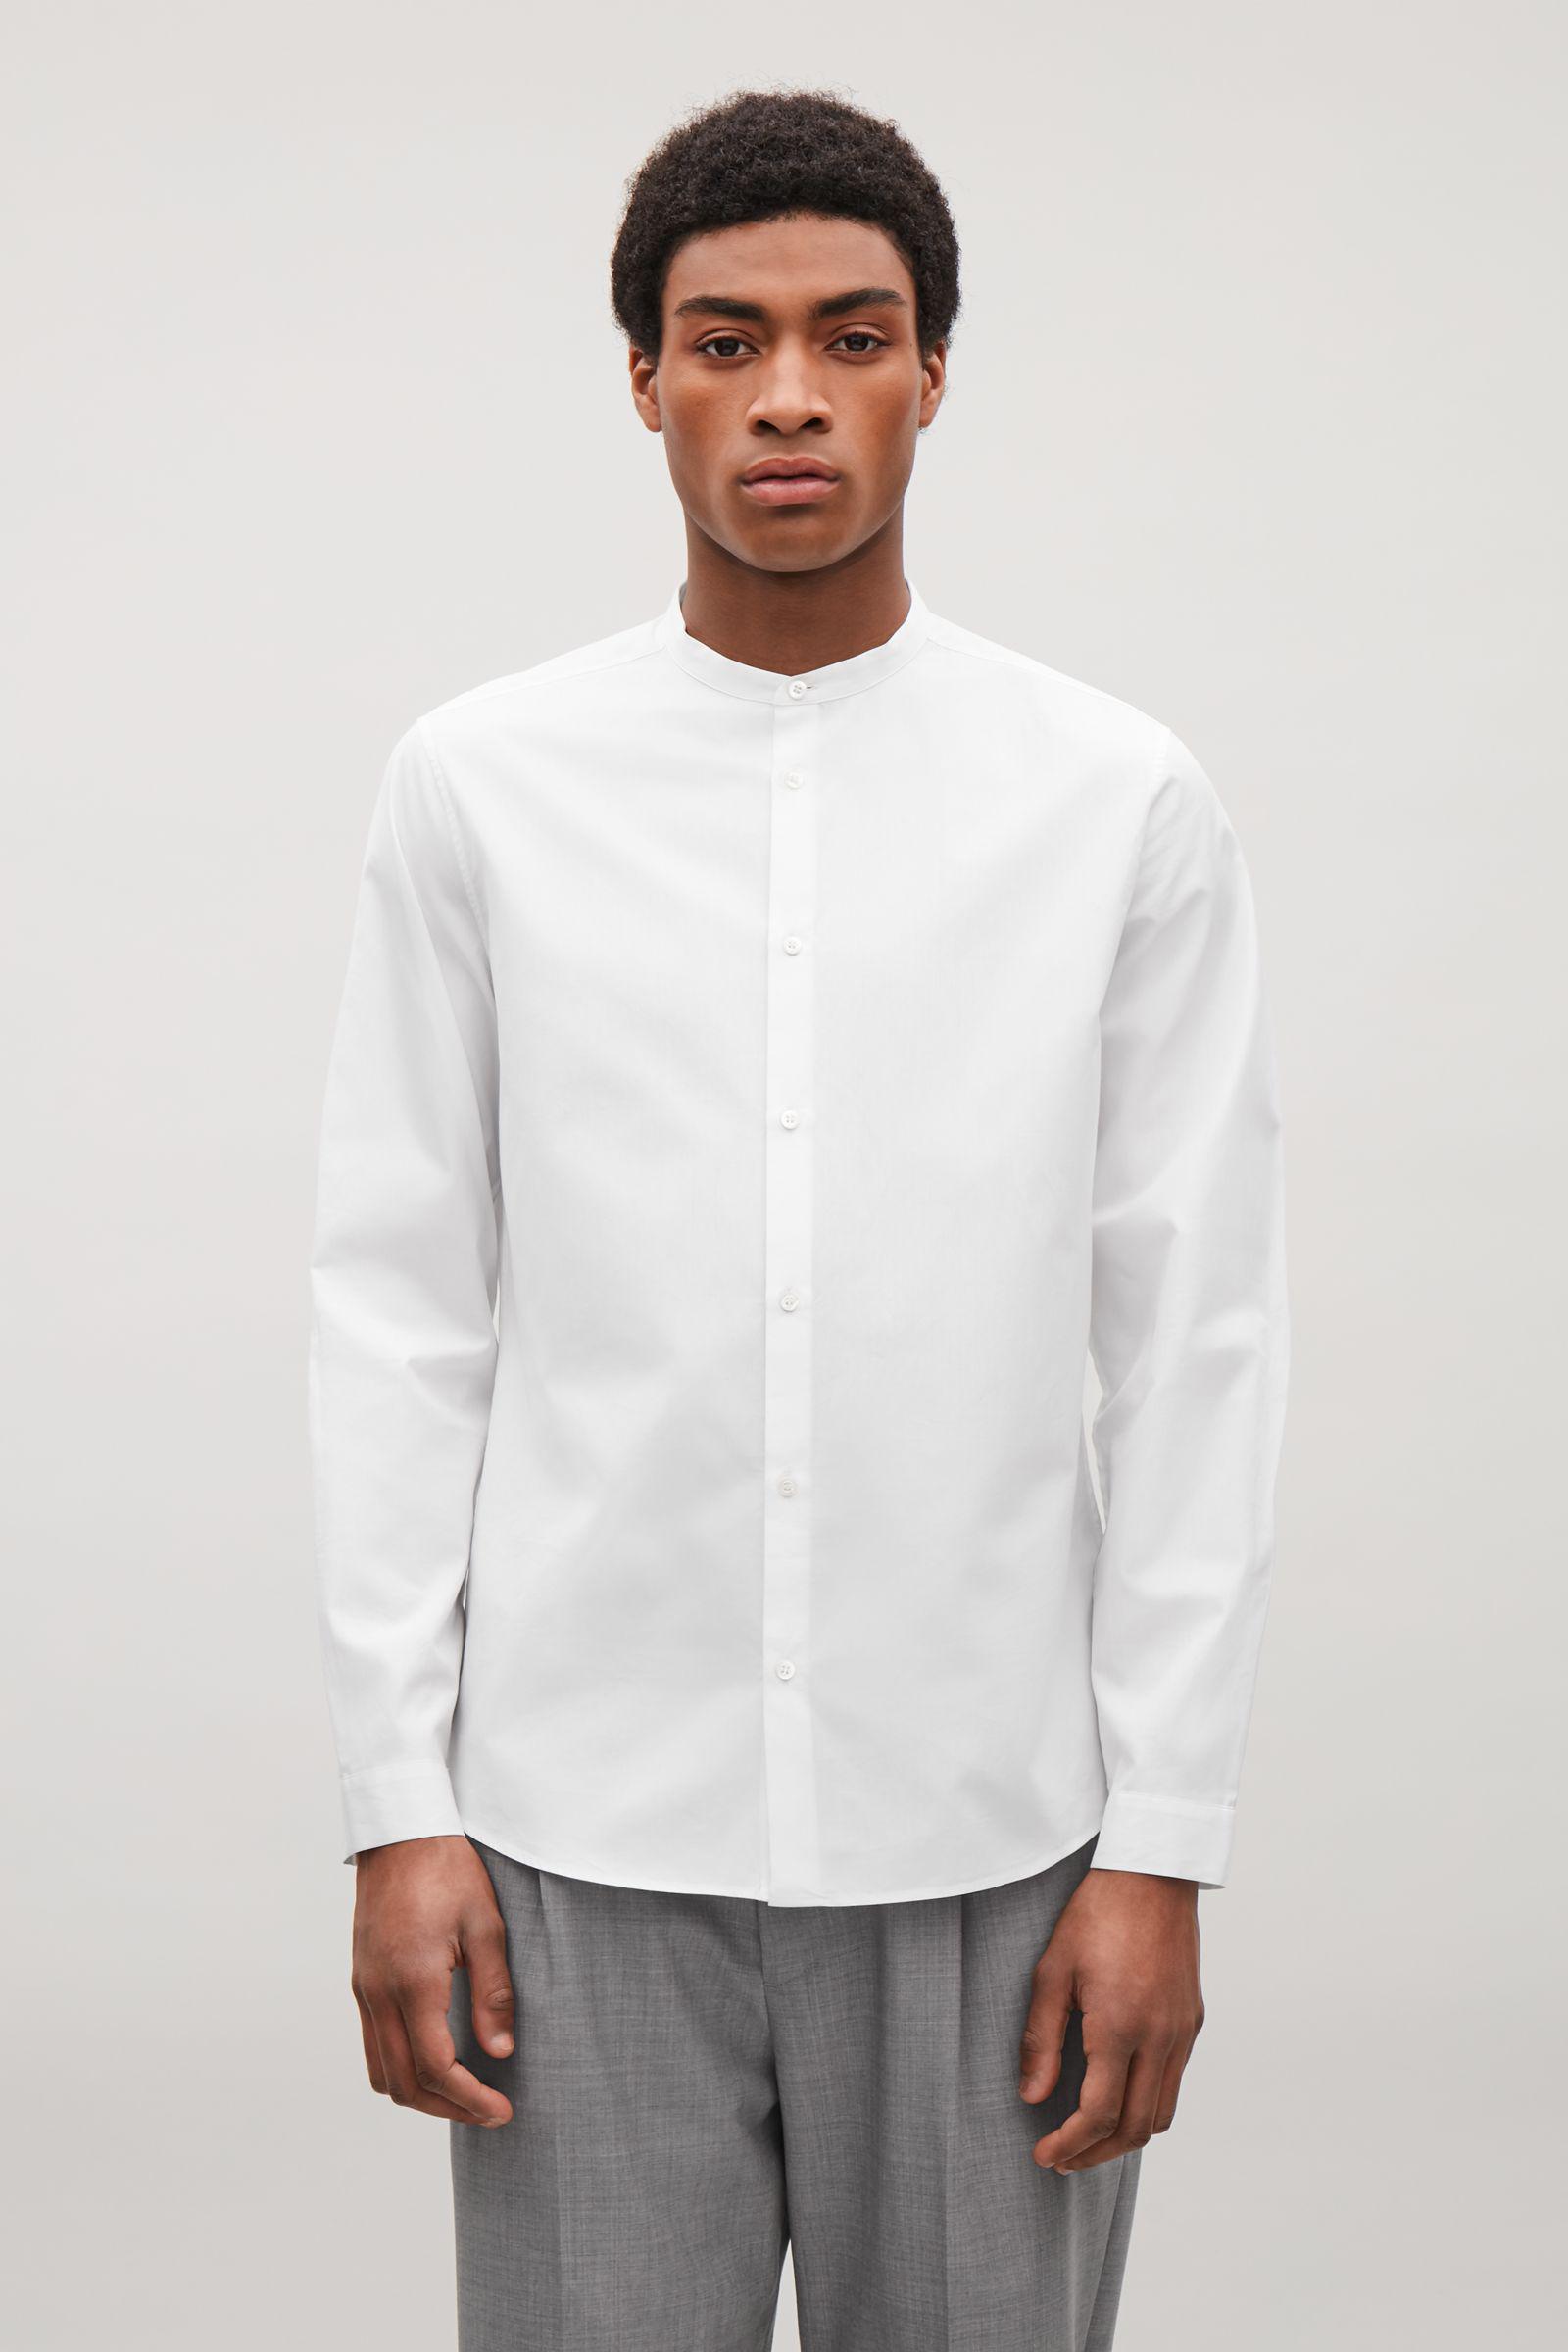 COS Collarless Cotton Shirt in White for Men